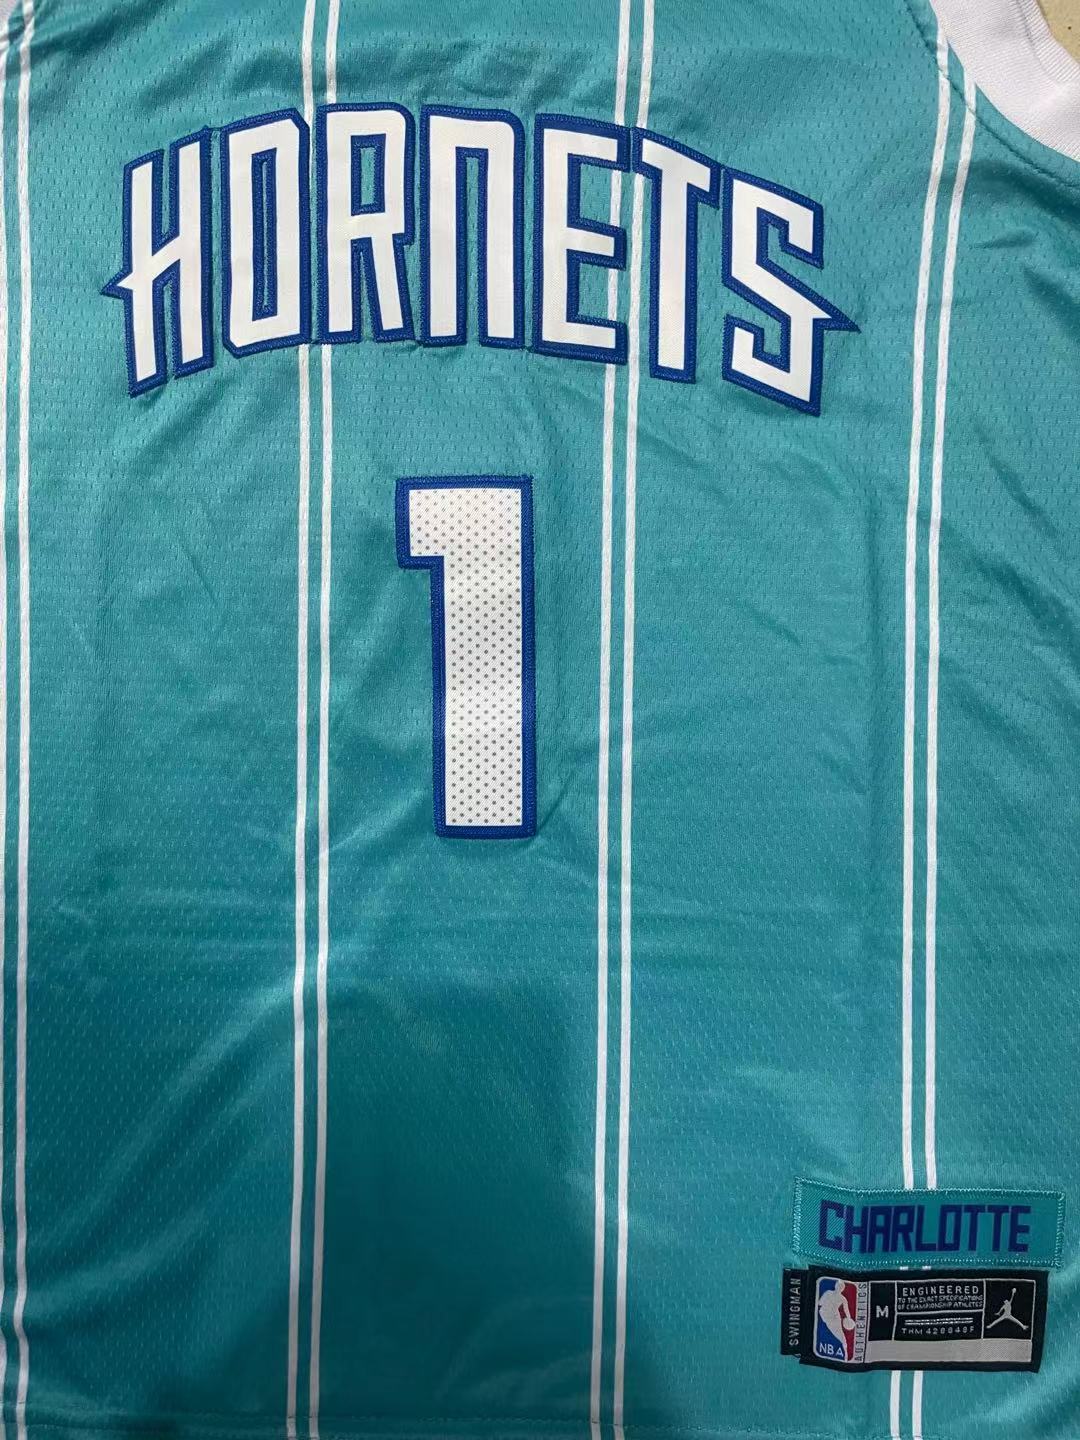 lamelo ball hornets youth jersey